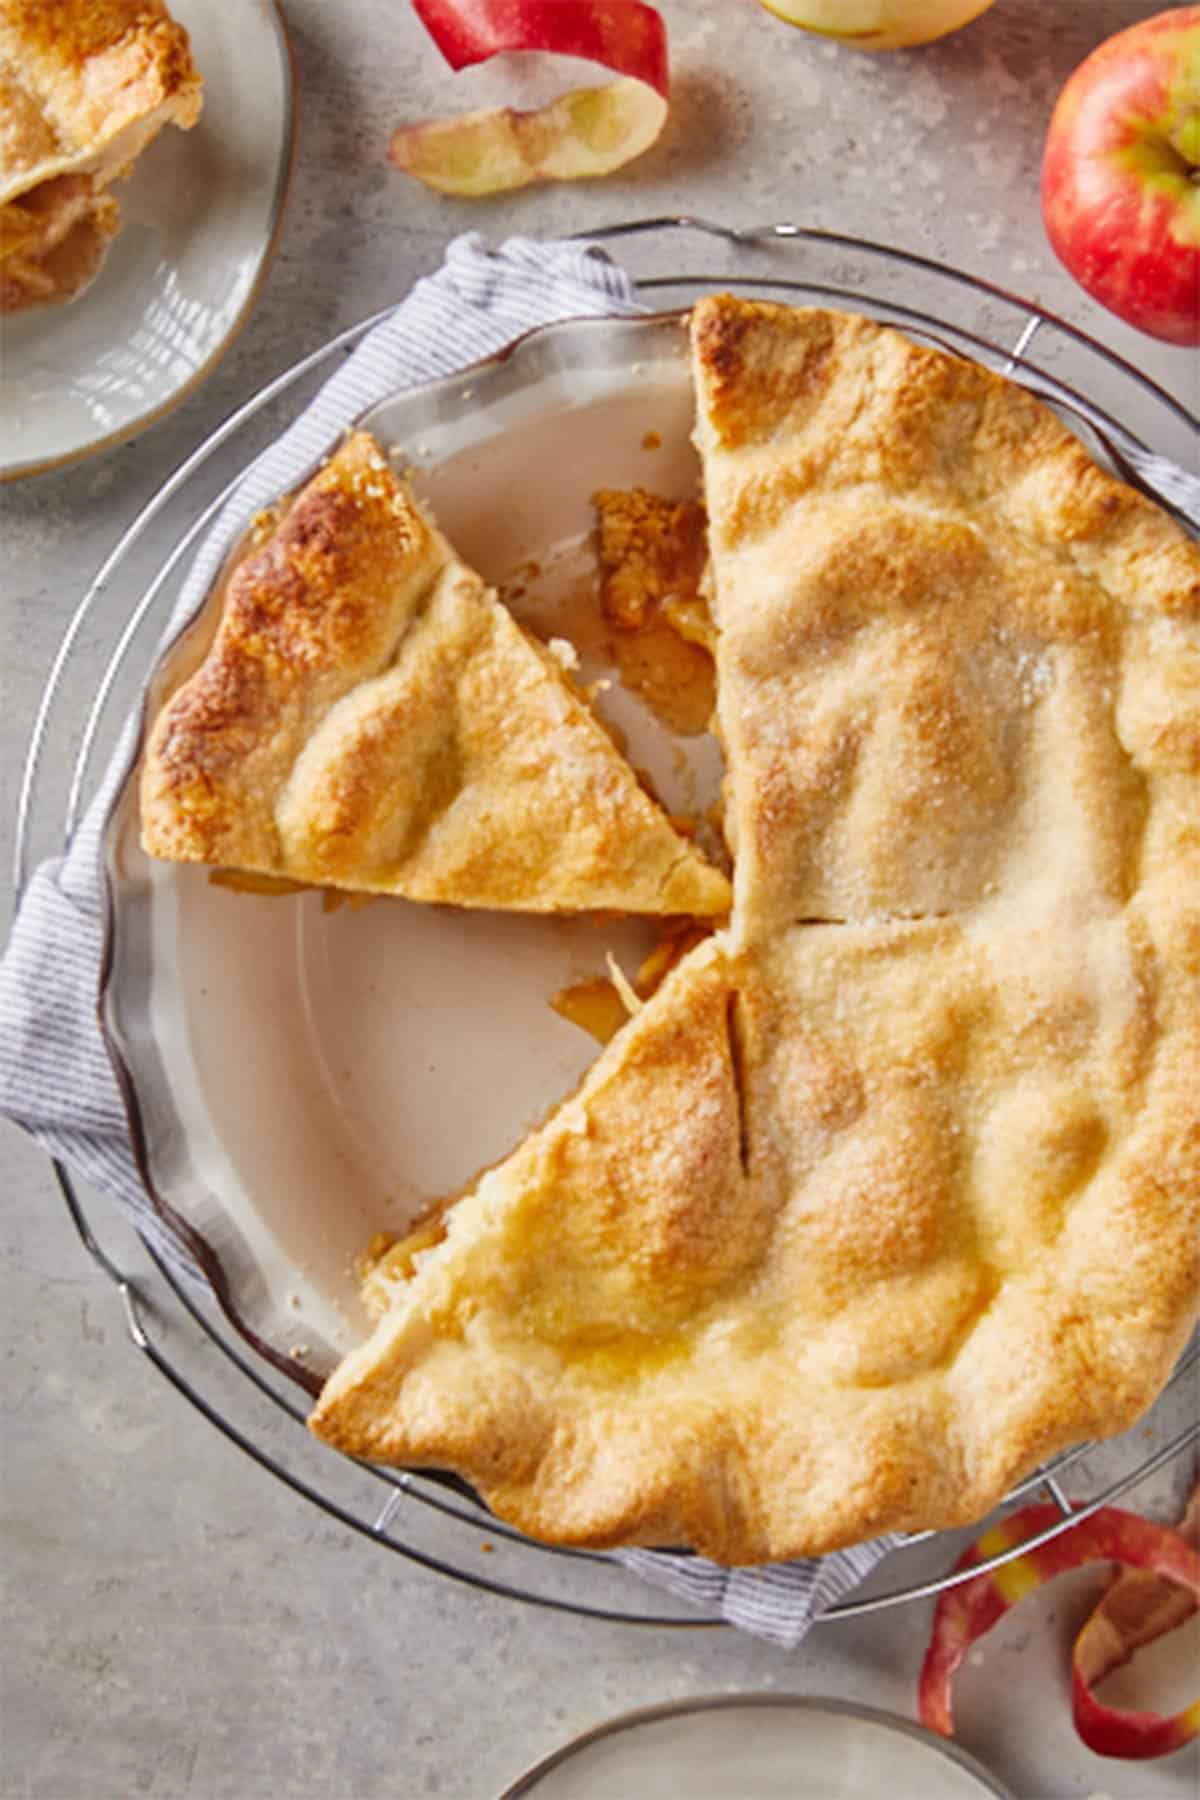 A large apple pie recipe with slices removed ready to serve